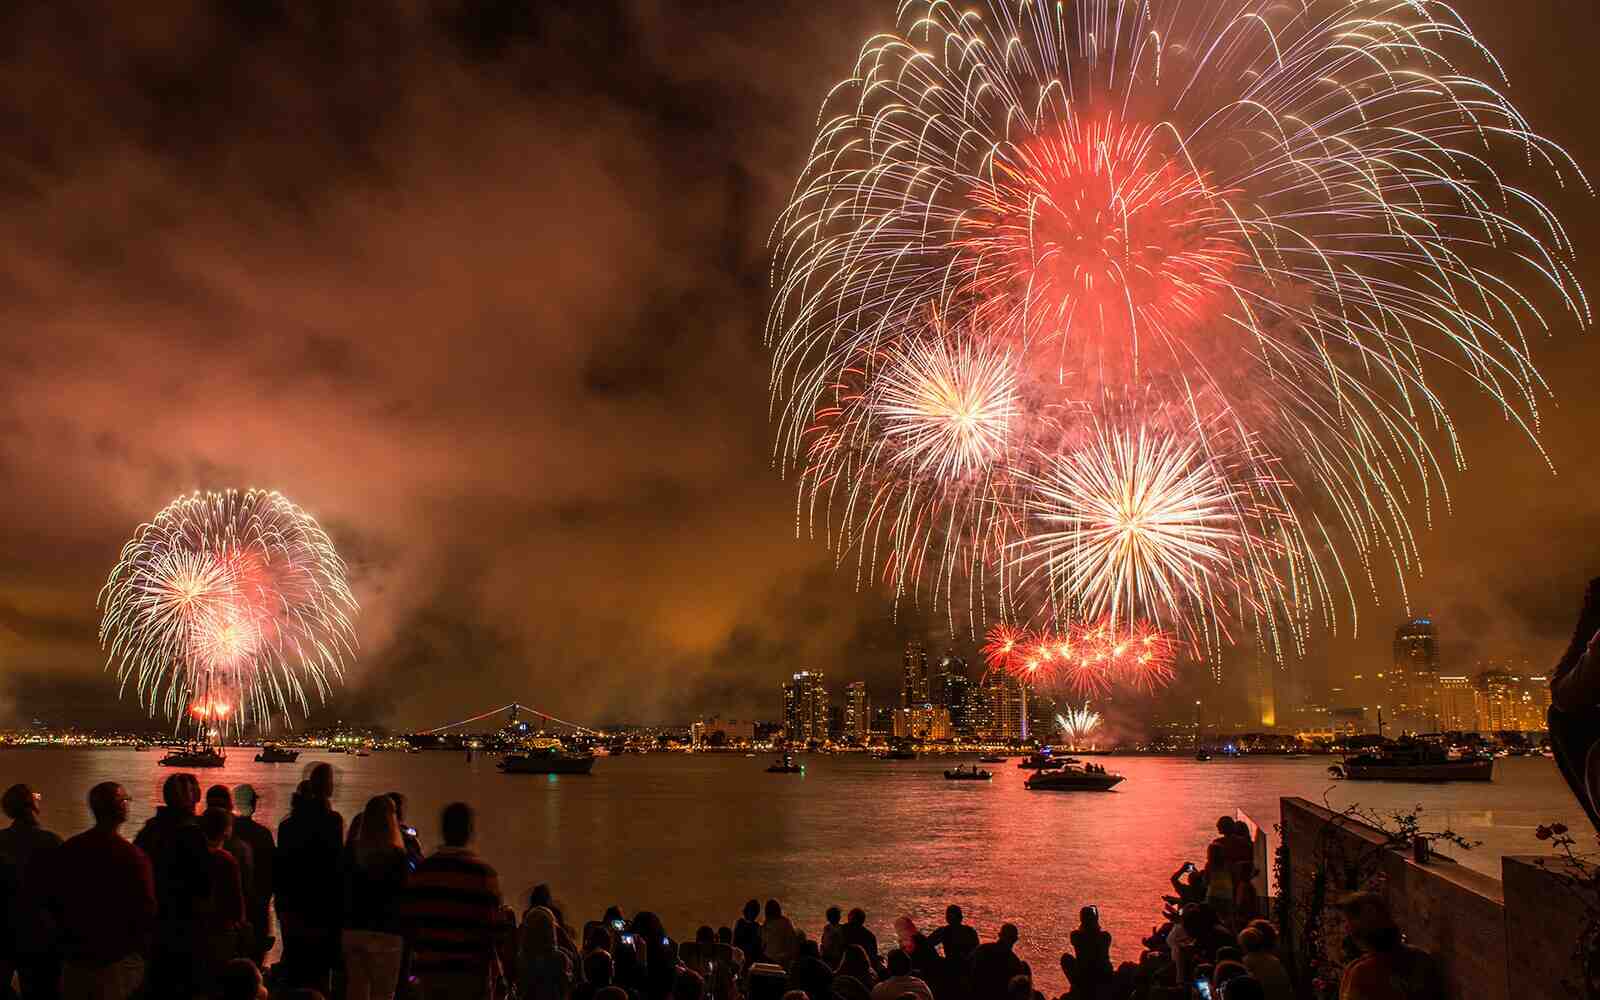 Where should I go for 4th of July in San Diego?